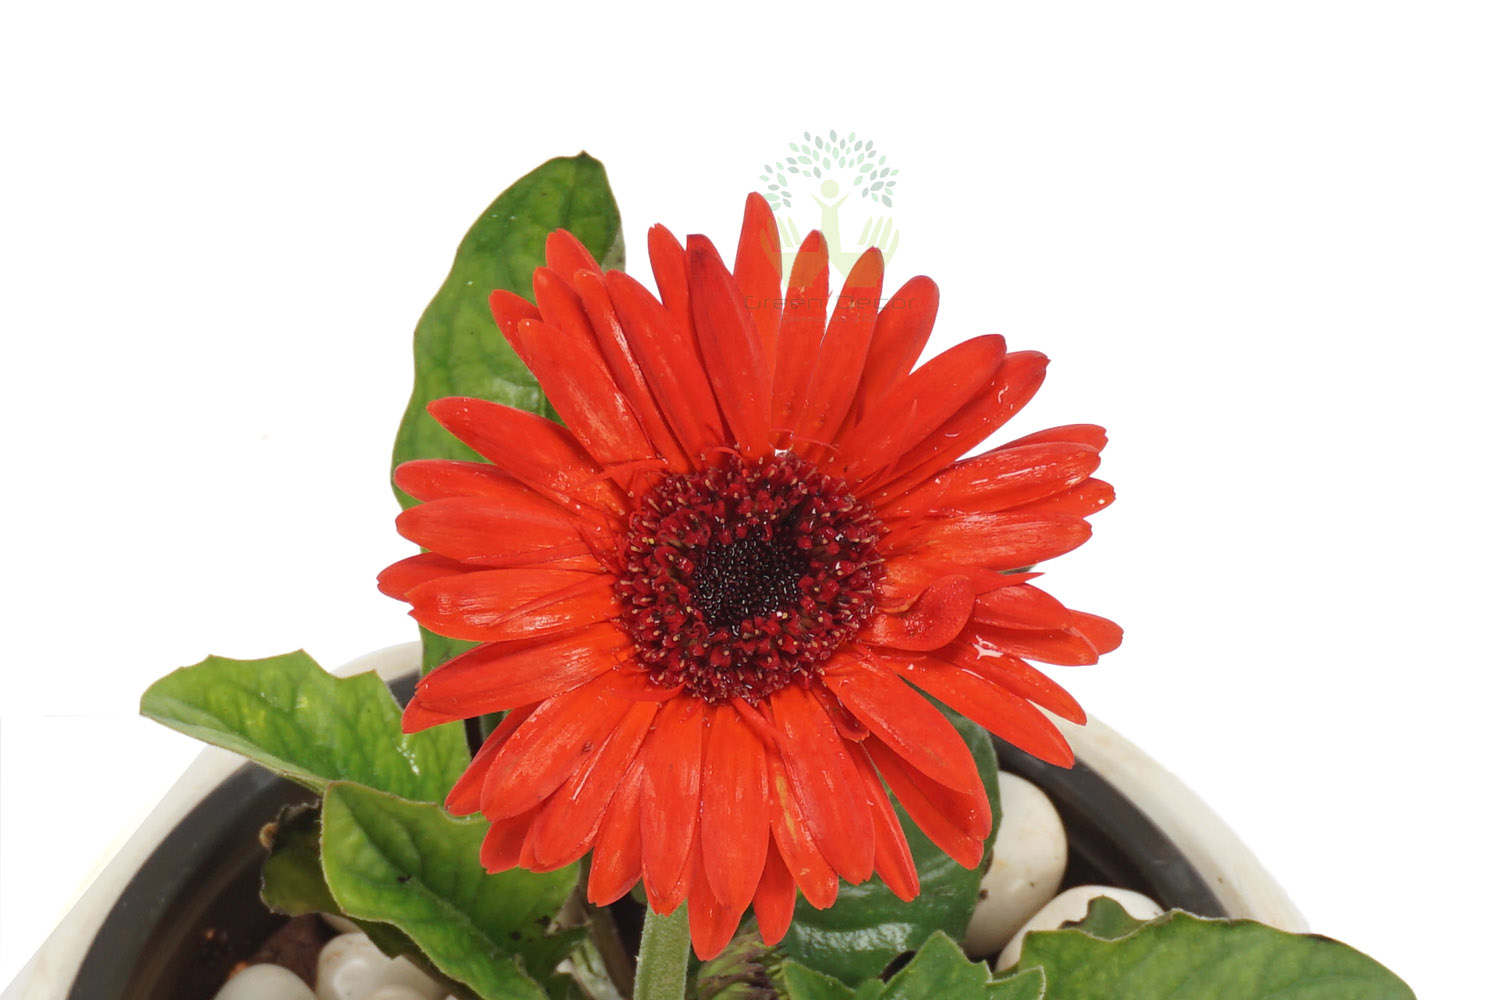 Buy Gerbera Daisy Plants , White Pots and seeds in Delhi NCR by the best online nursery shop Greendecor.